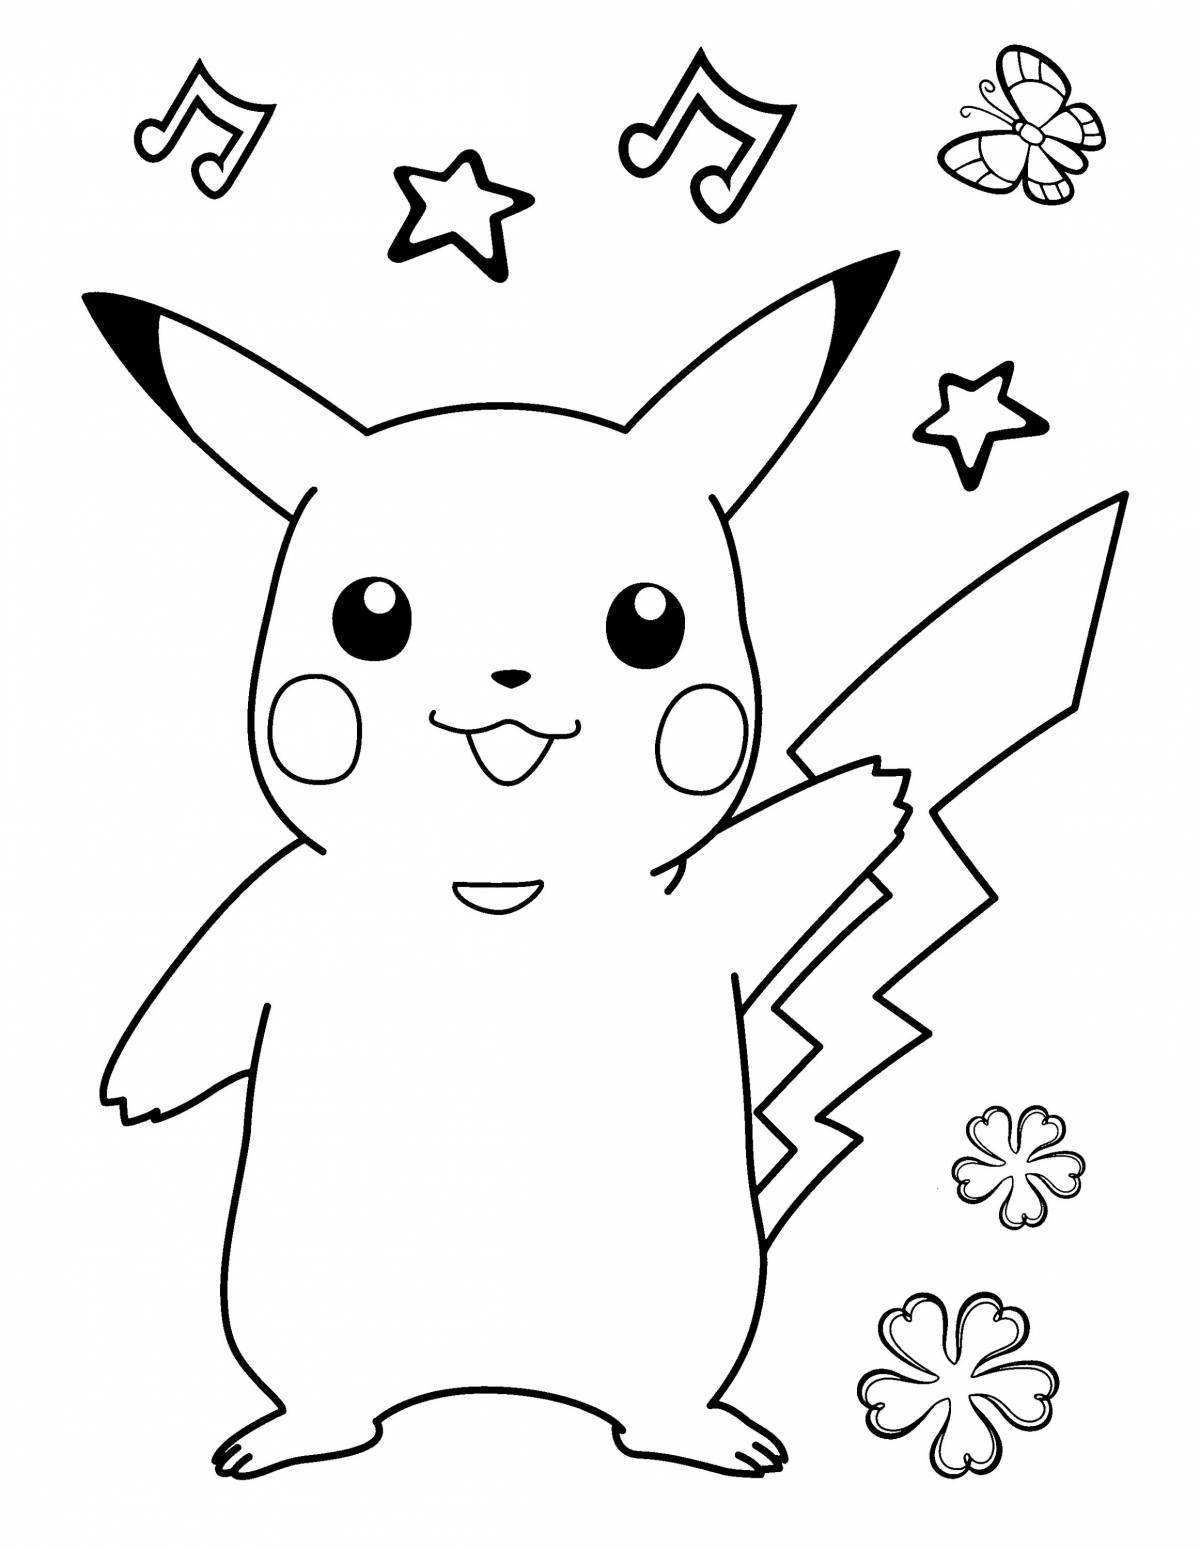 Pikachu live coloring page